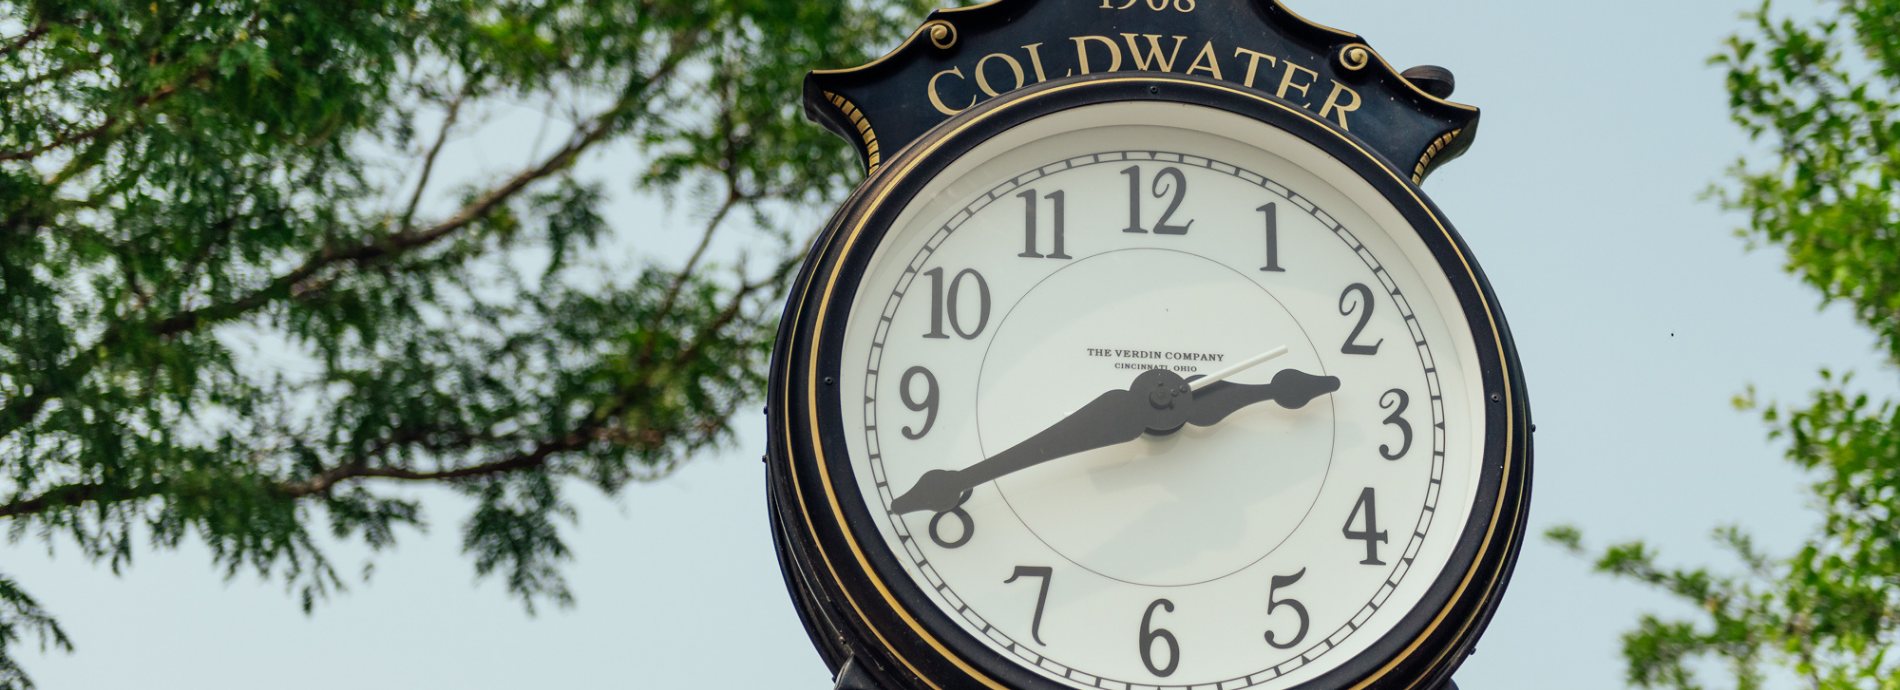 Coldwater clock face